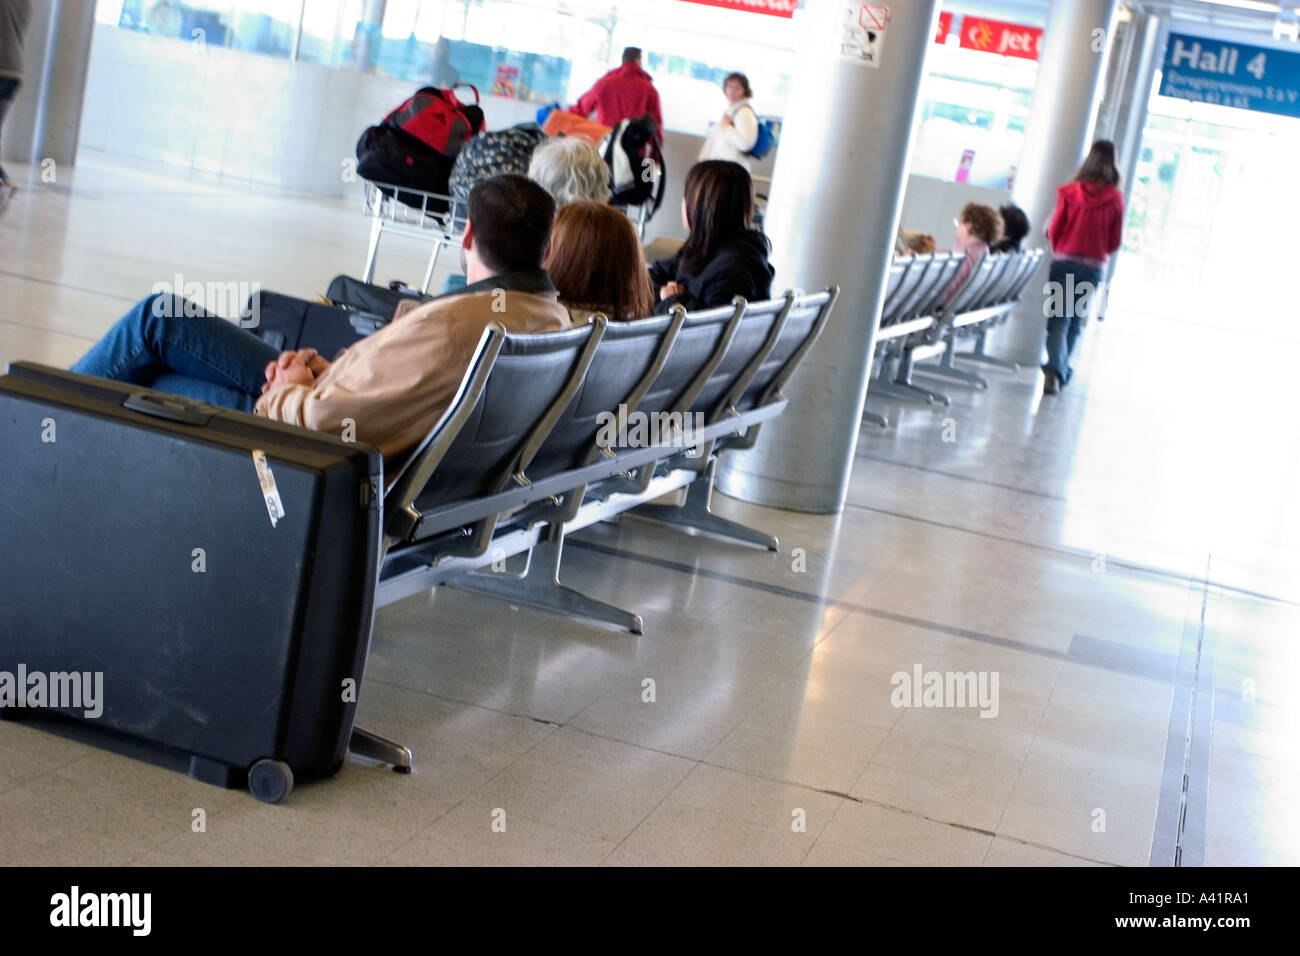 Travelers sitting and waiting on chairs and bench an airplane in nantes airport france Stock Photo